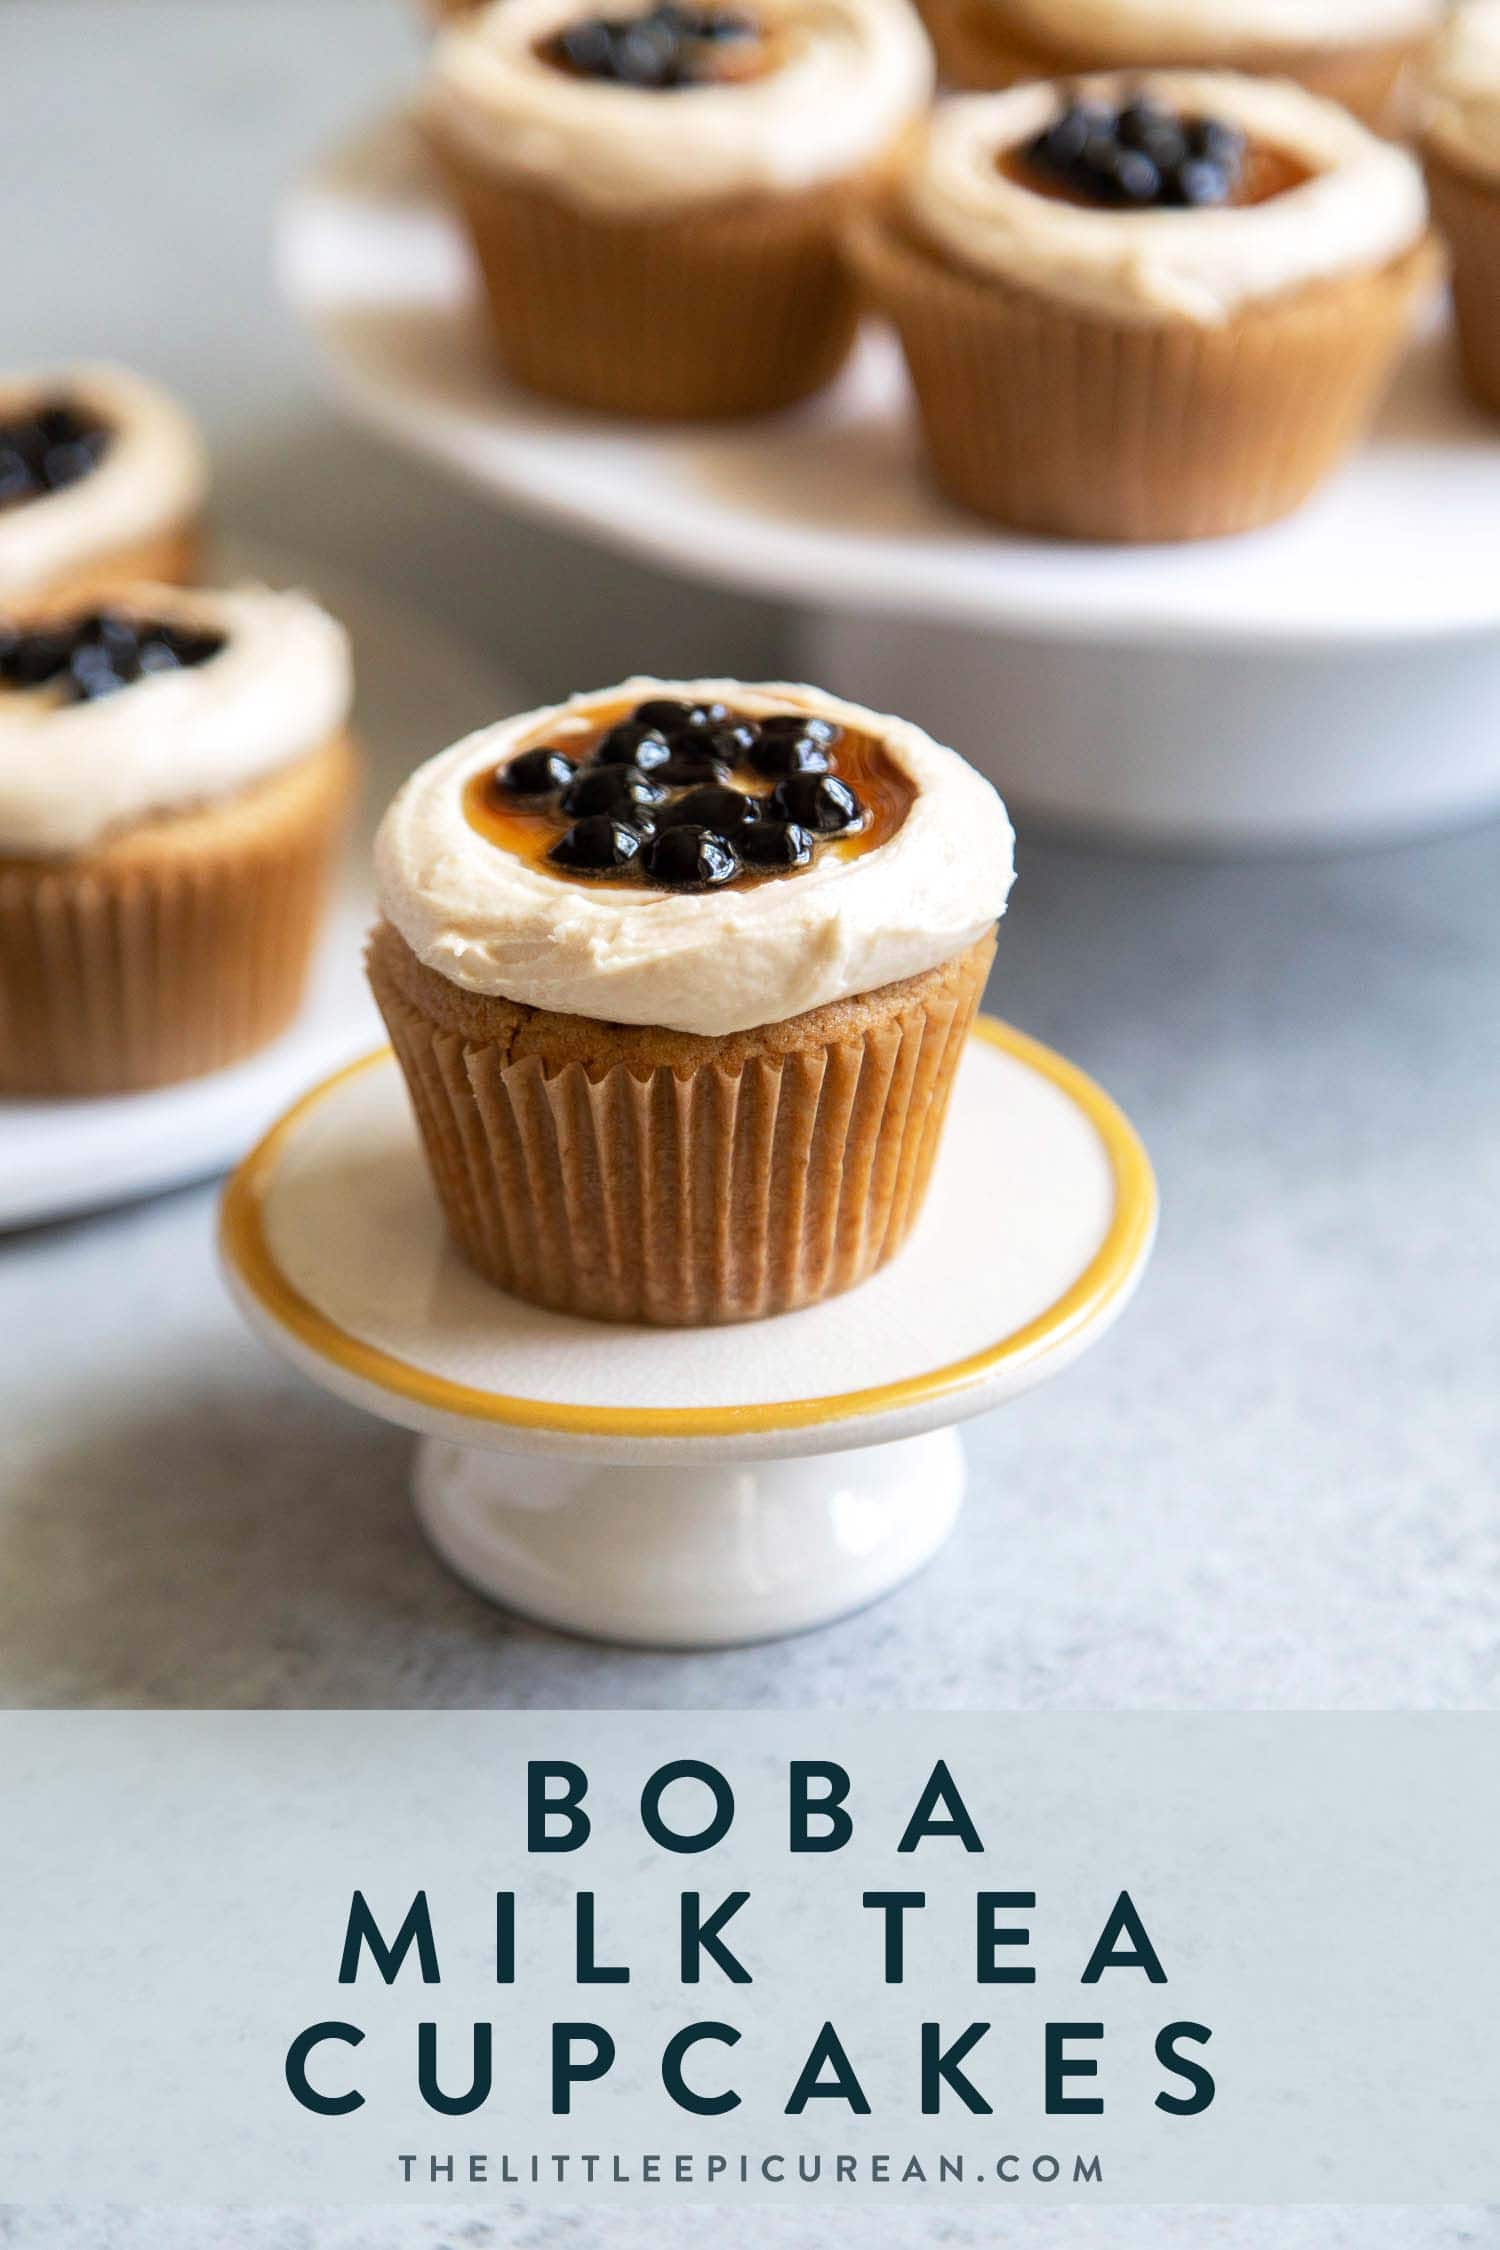 Boba Tea Cupcakes. Milk tea cupcakes filled with brown sugar boba and frosted with milk tea buttercream.